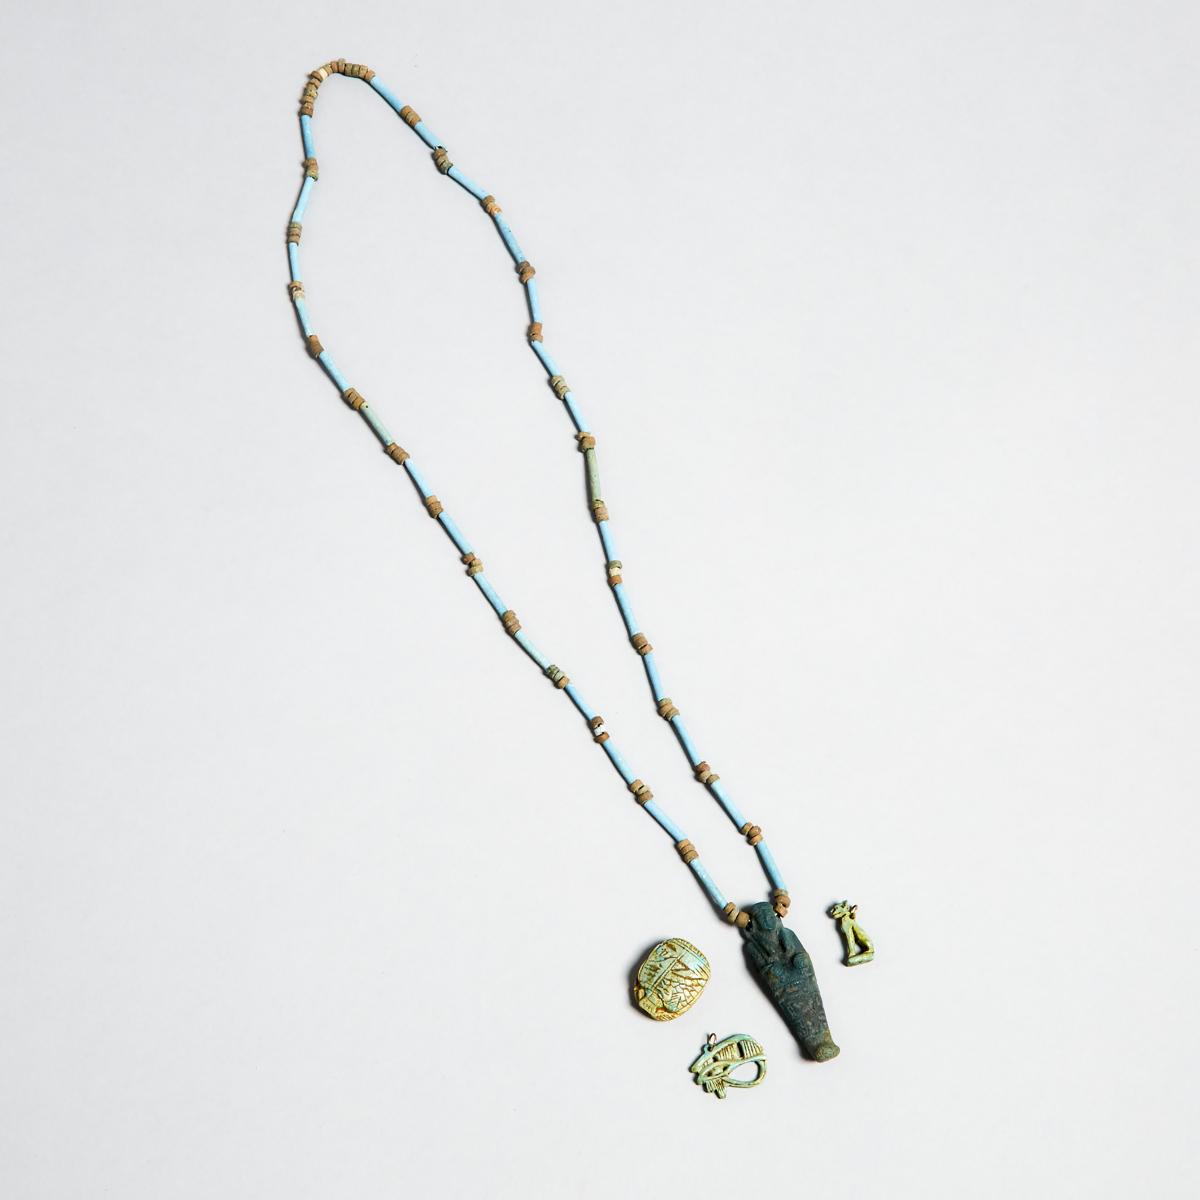 Group of Egyptian Turquoise Faience Amulets and Beads, New Kingdom to Late Period, 1550-332 B.C., sh